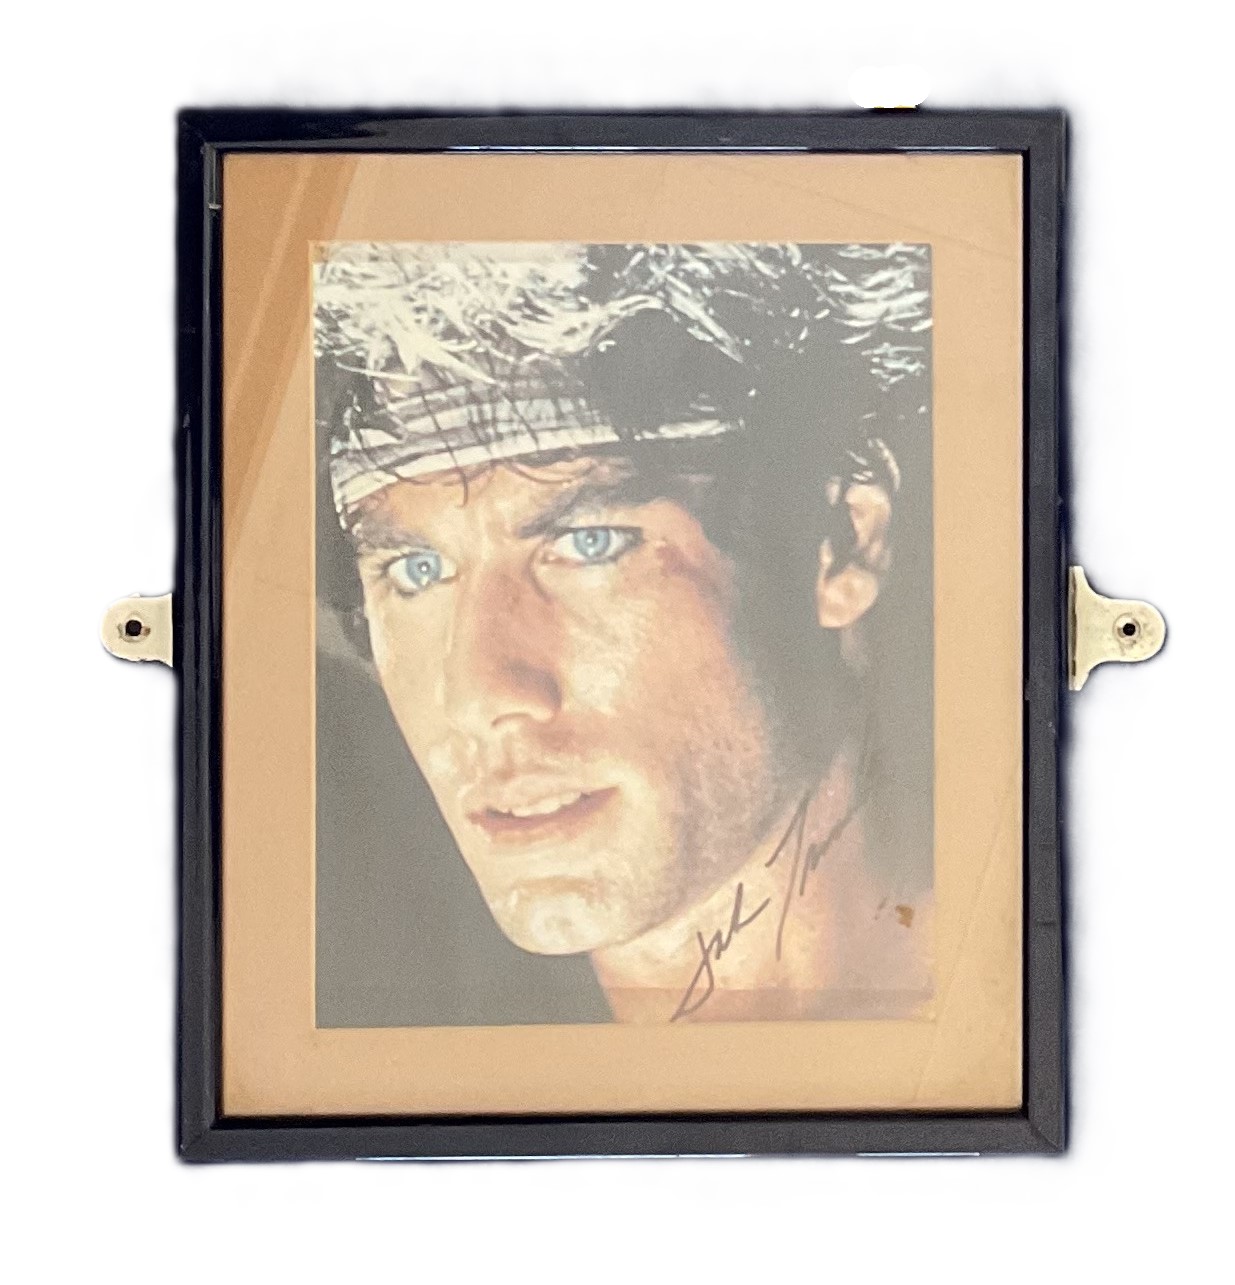 John Travolta signed colour photo, Staying Alive movie sequel. Framed. Measures 11 inch by 13-inch